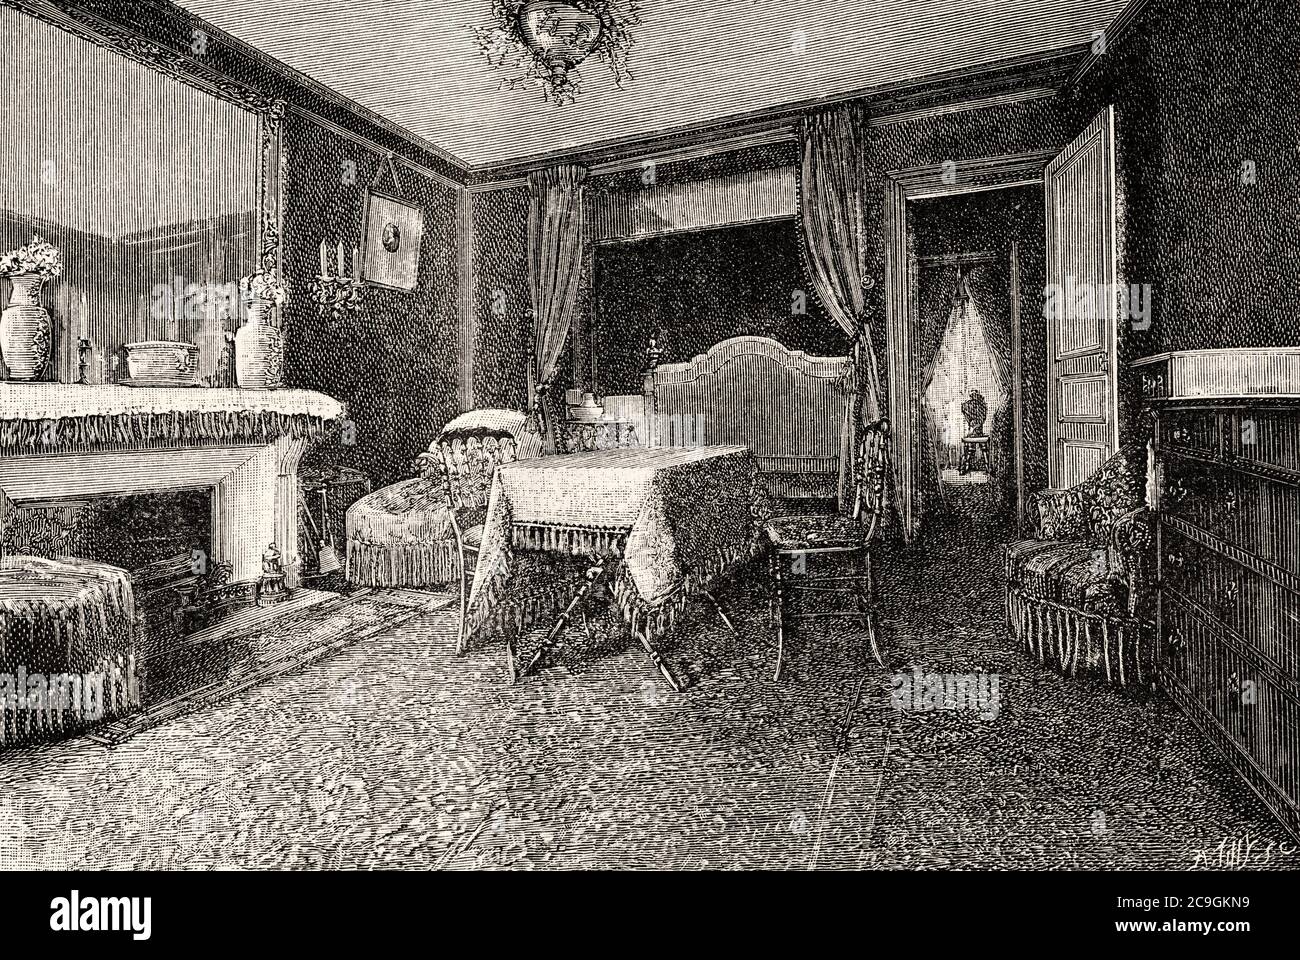 Cabinet and bedroom where the corpse of the victim was locked in the chest. Gouffé trunk. Millery bloody trunk, the Gouffé Case or the Eyraud-Bompard affair was an 1889 French murder case, Paris. France. Old XIX century engraved illustration from La Ilustracion Española y Americana 1890 Stock Photo